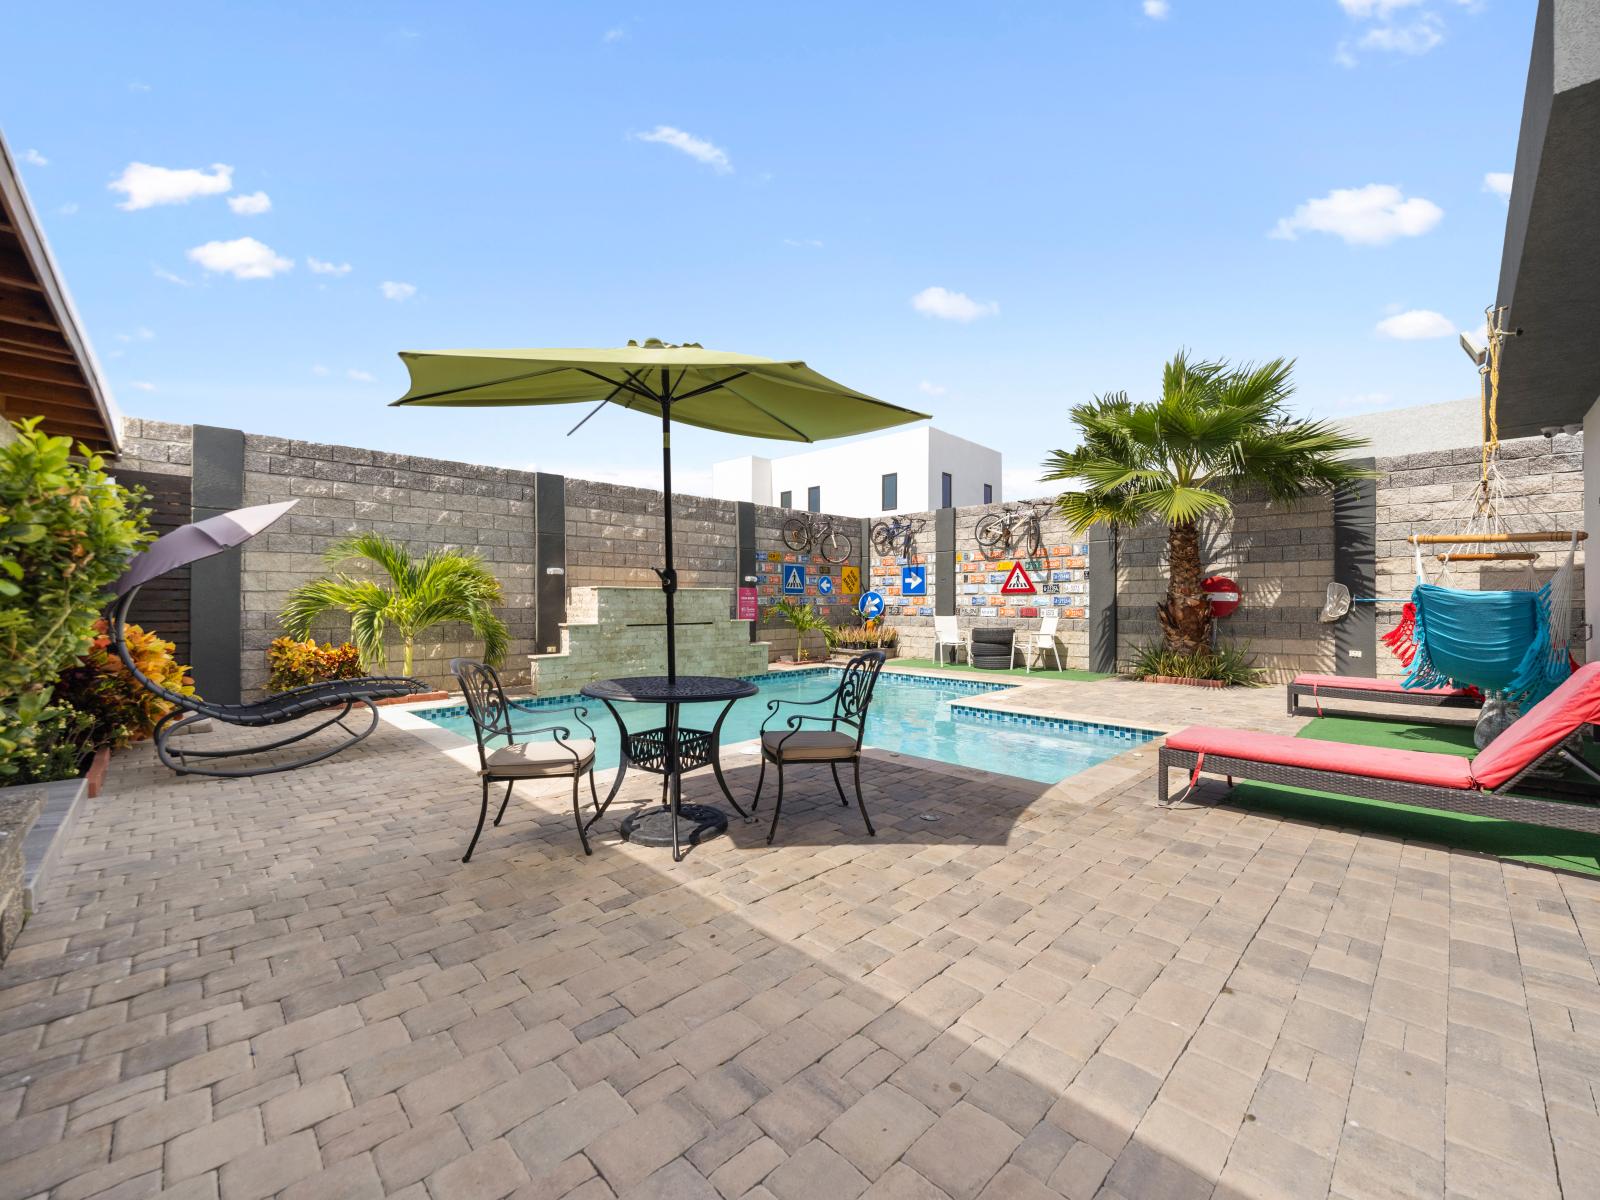 Experience outdoor living at its finest with this spacious area featuring seating, a pool, and shaded dining - Indulge in relaxation and entertainment in this outdoor oasis complete with plush seating - Dive into a refreshing poolside escape